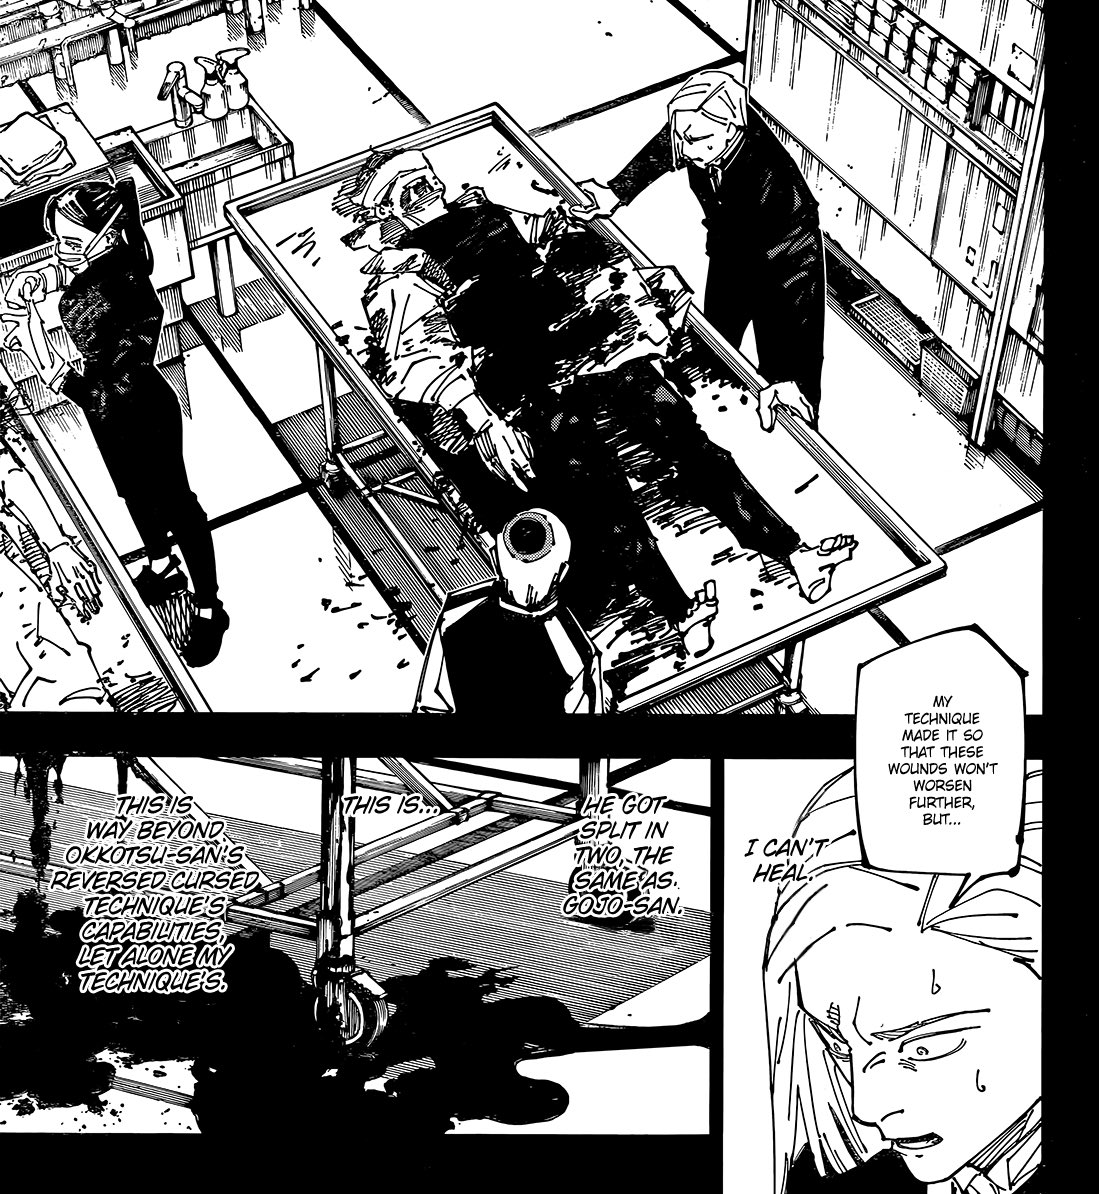 Reading the recent JJK chapter made me hate megumi even more cause if it wasn’t for that bum ass nigga laying on the floor yuta wouldn’t have got cut in half